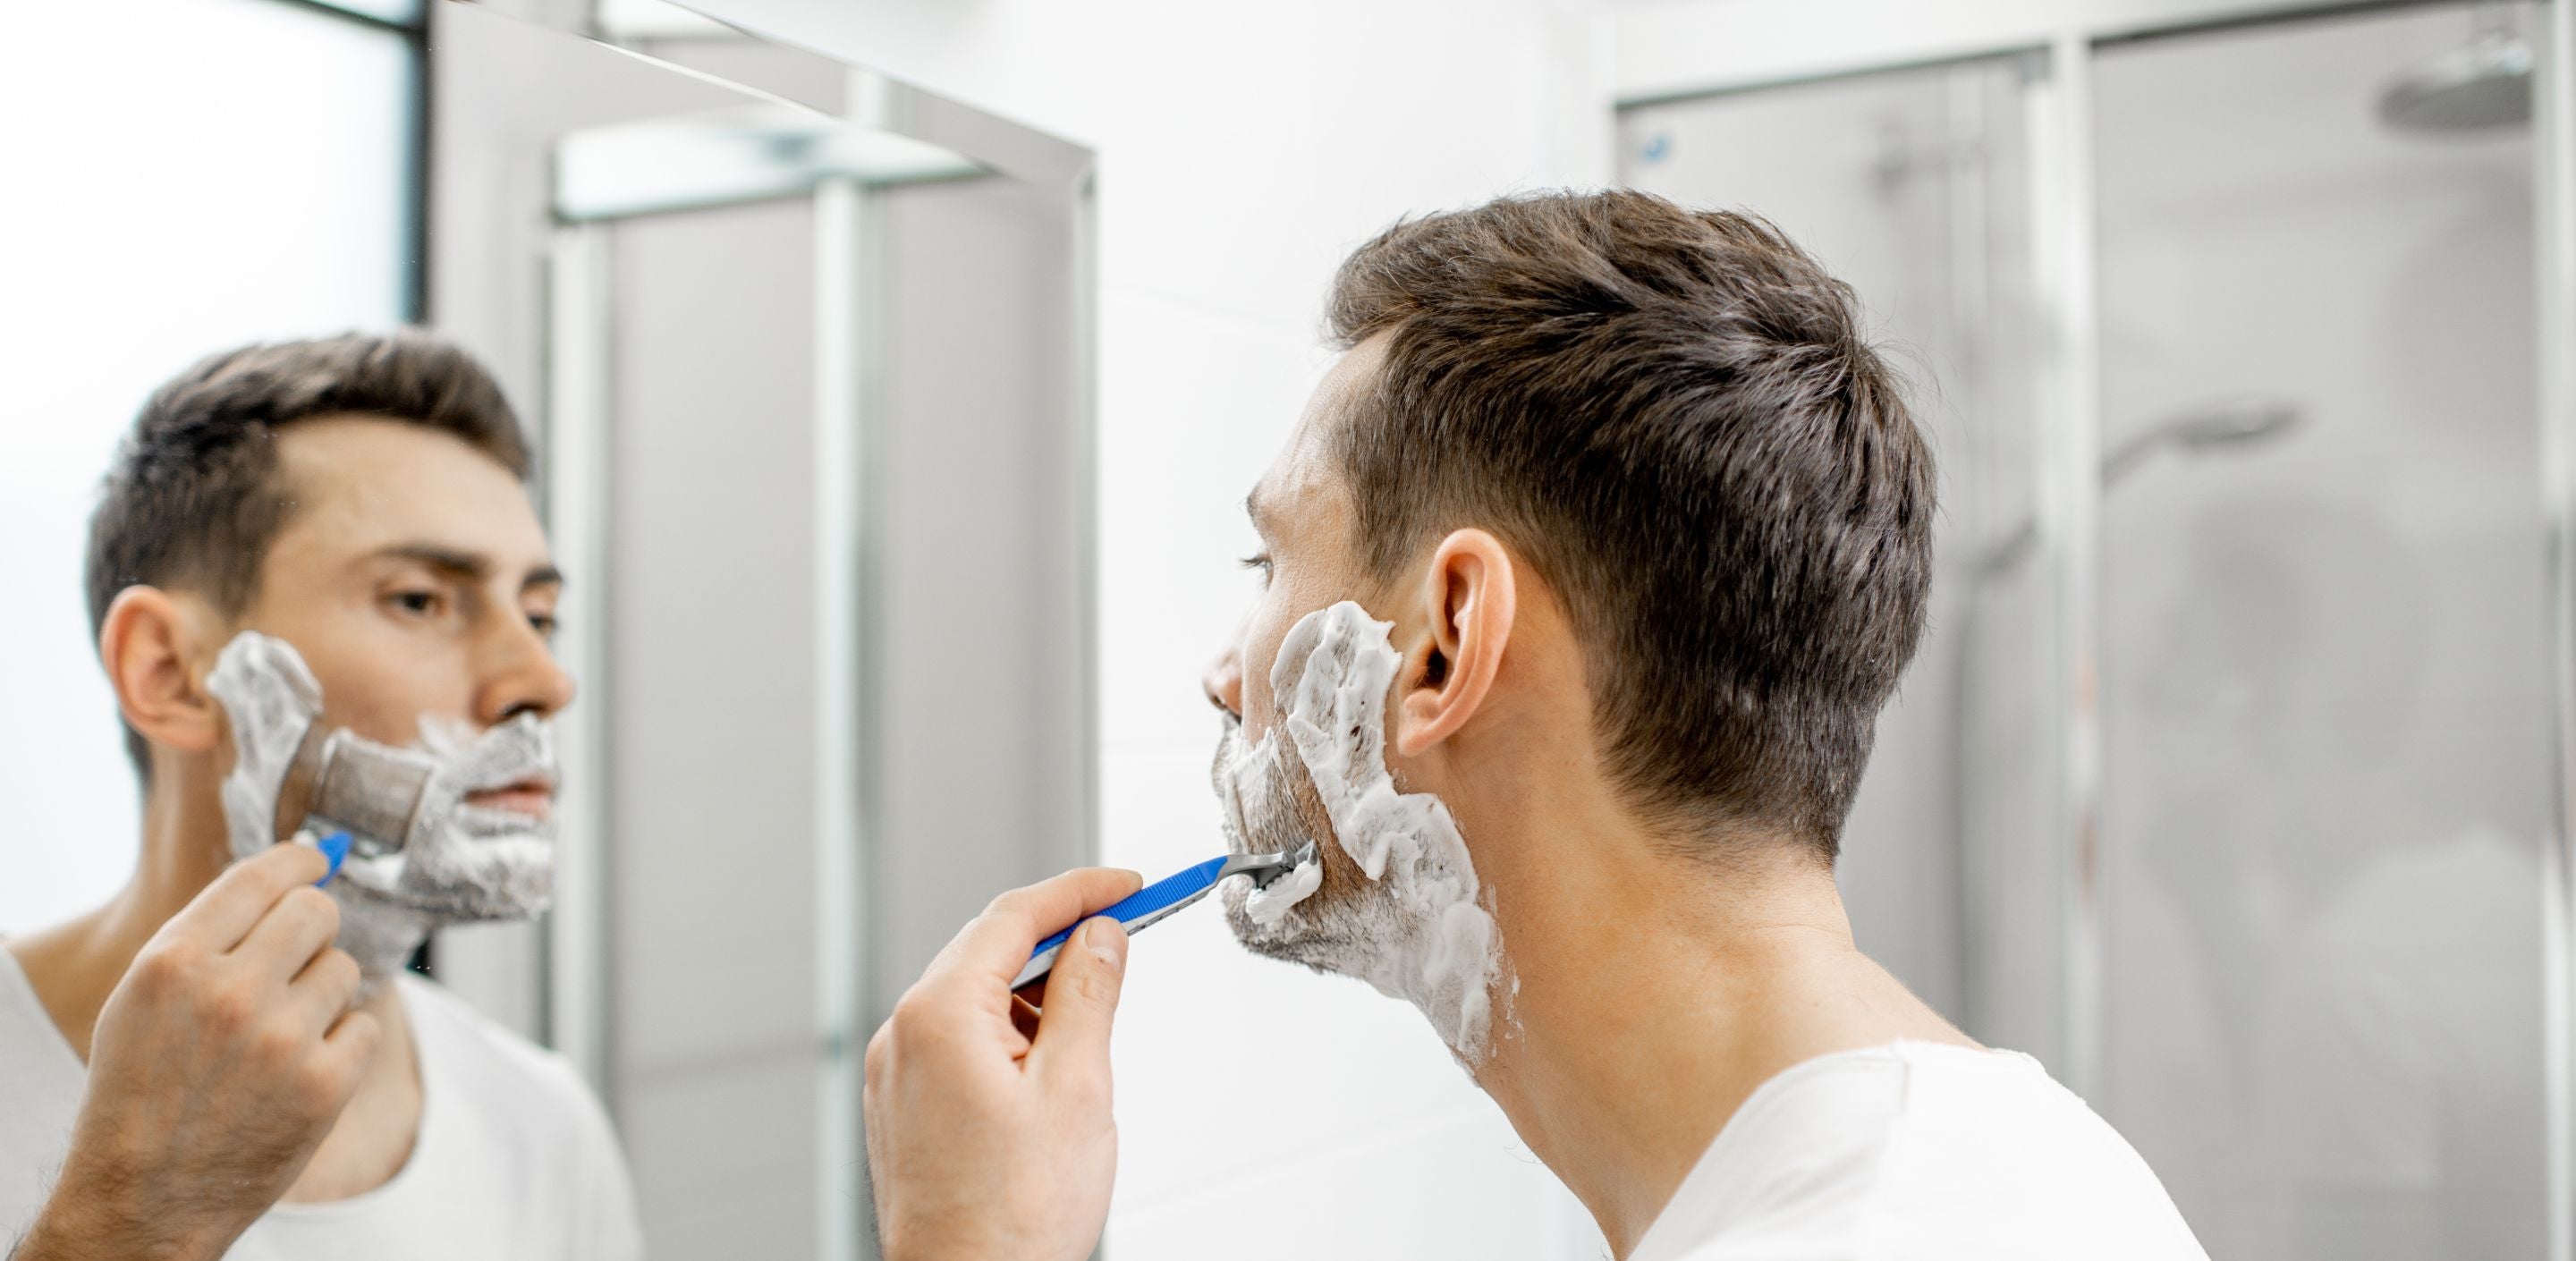 Shaving tips to better your shave